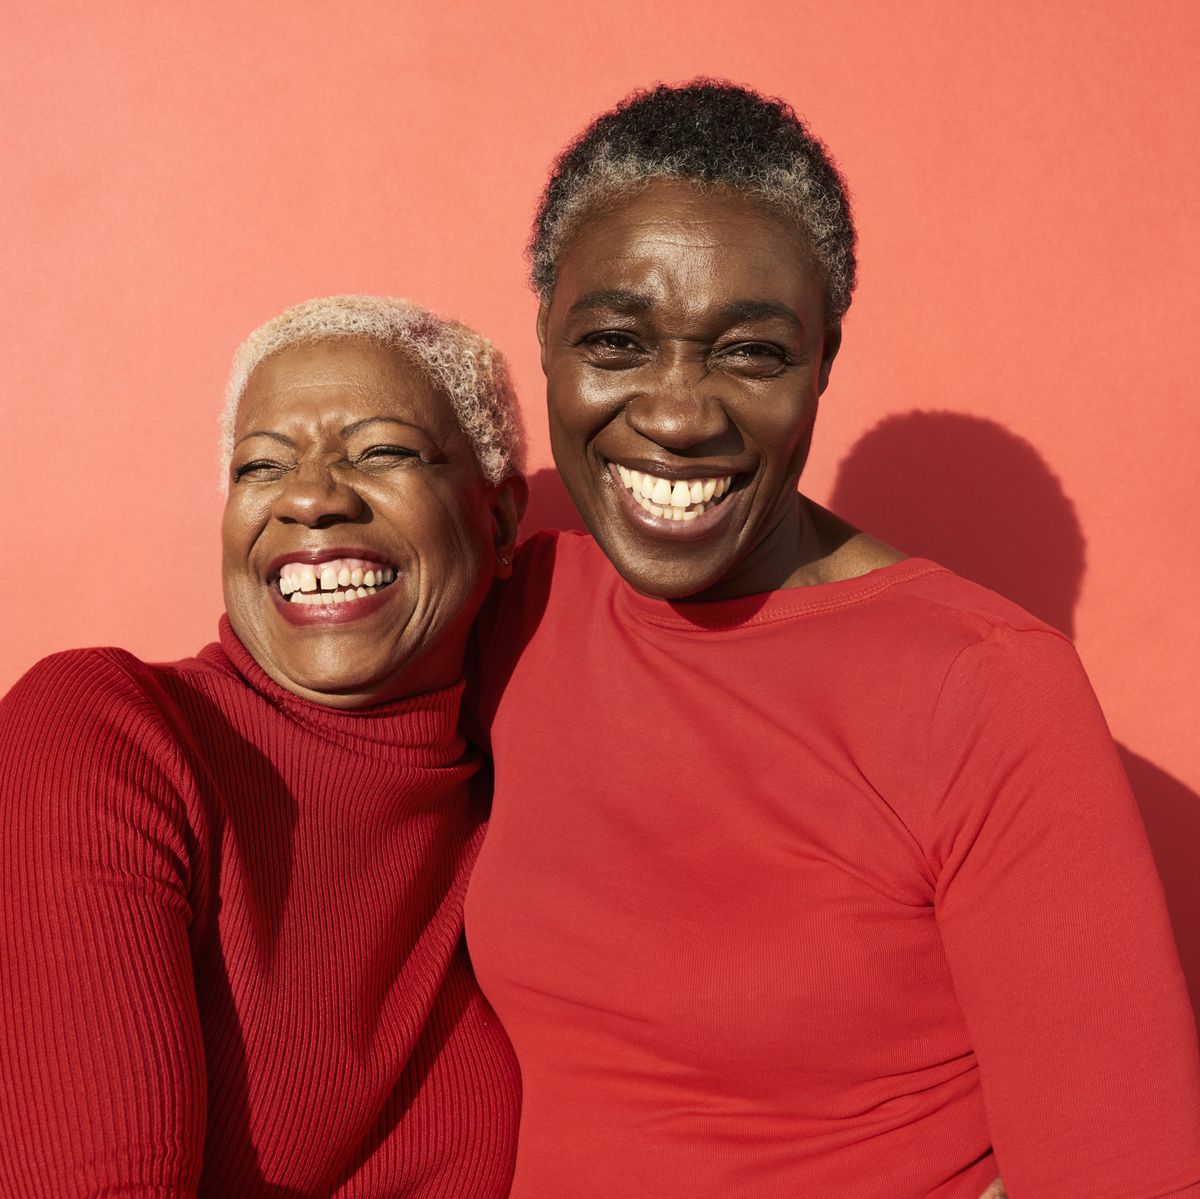 https://hips.hearstapps.com/hmg-prod/images/portrait-of-two-women-smiling-royalty-free-image-1687811174.jpg?crop=0.800xw:1.00xh;0.0641xw,0&resize=1200:*